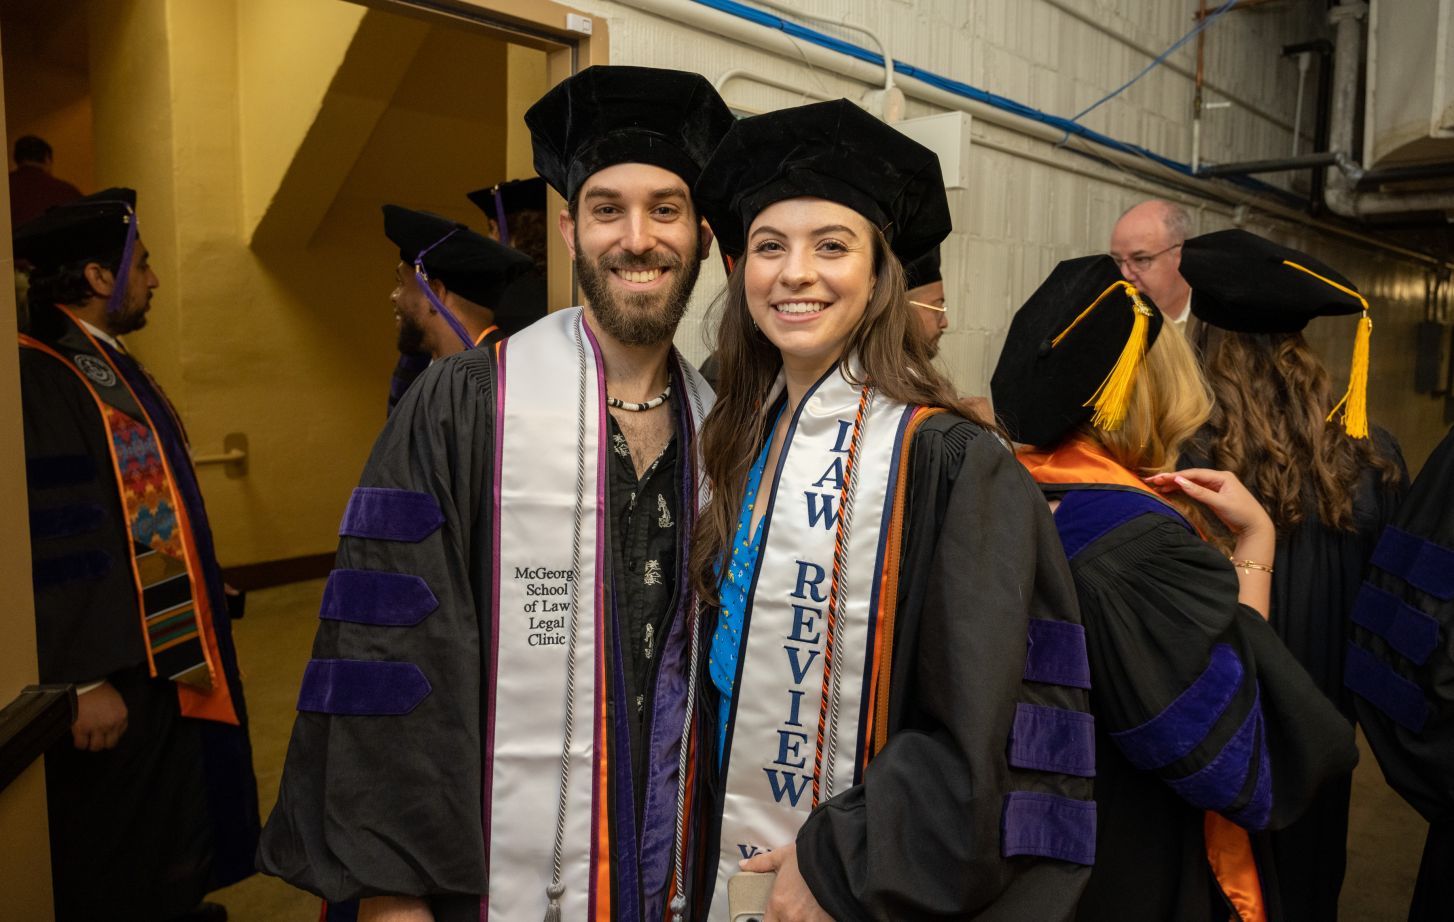 One male individual and one female individual wearing graduation regalia pose for a photo in the basement of an event venue